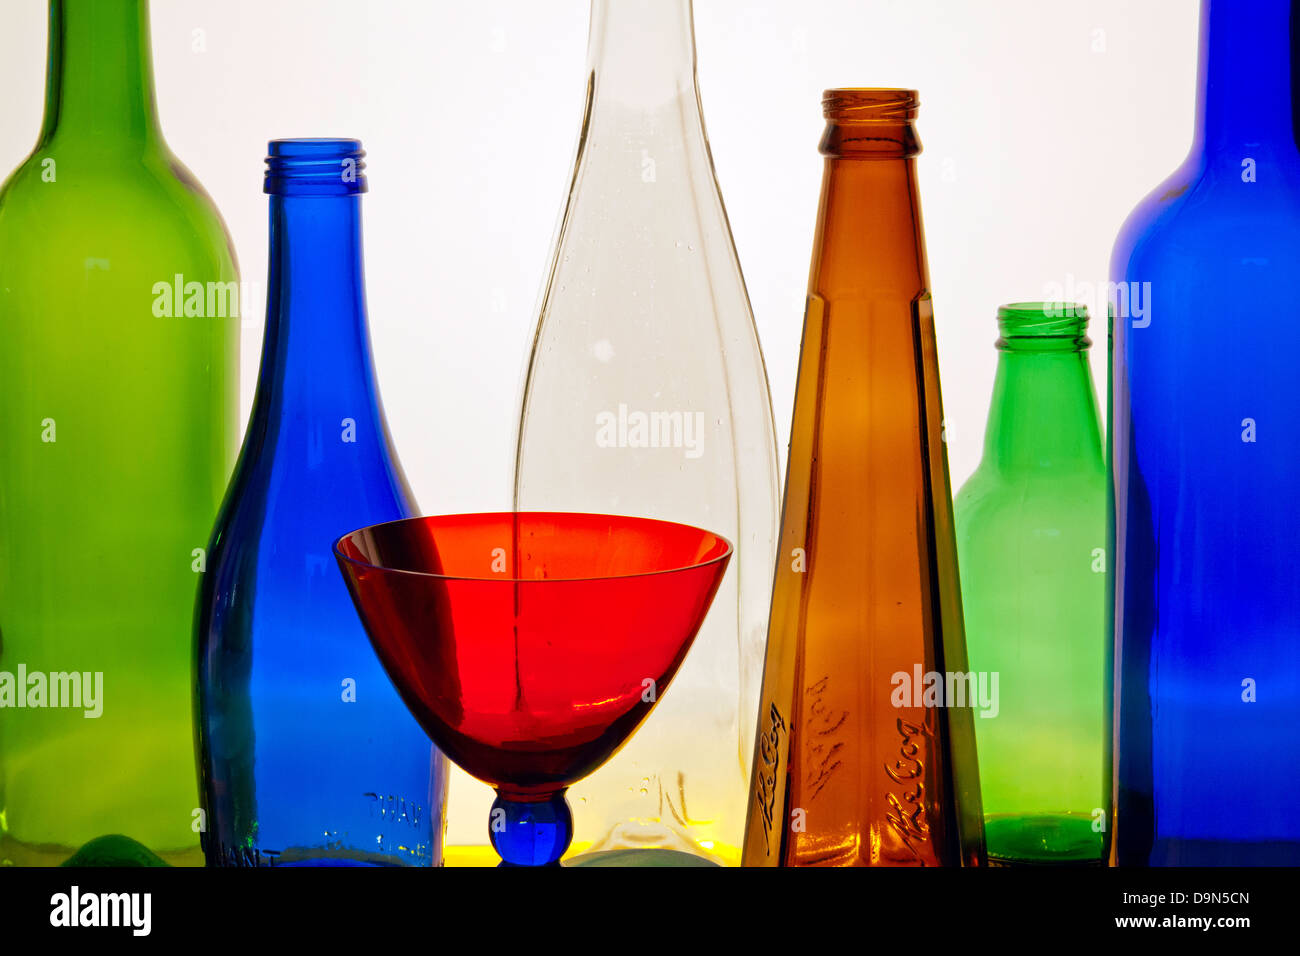 An abstract arrangement of multi-coloured glass bottles of different shapes and a red goblet against a backlit white screen Stock Photo